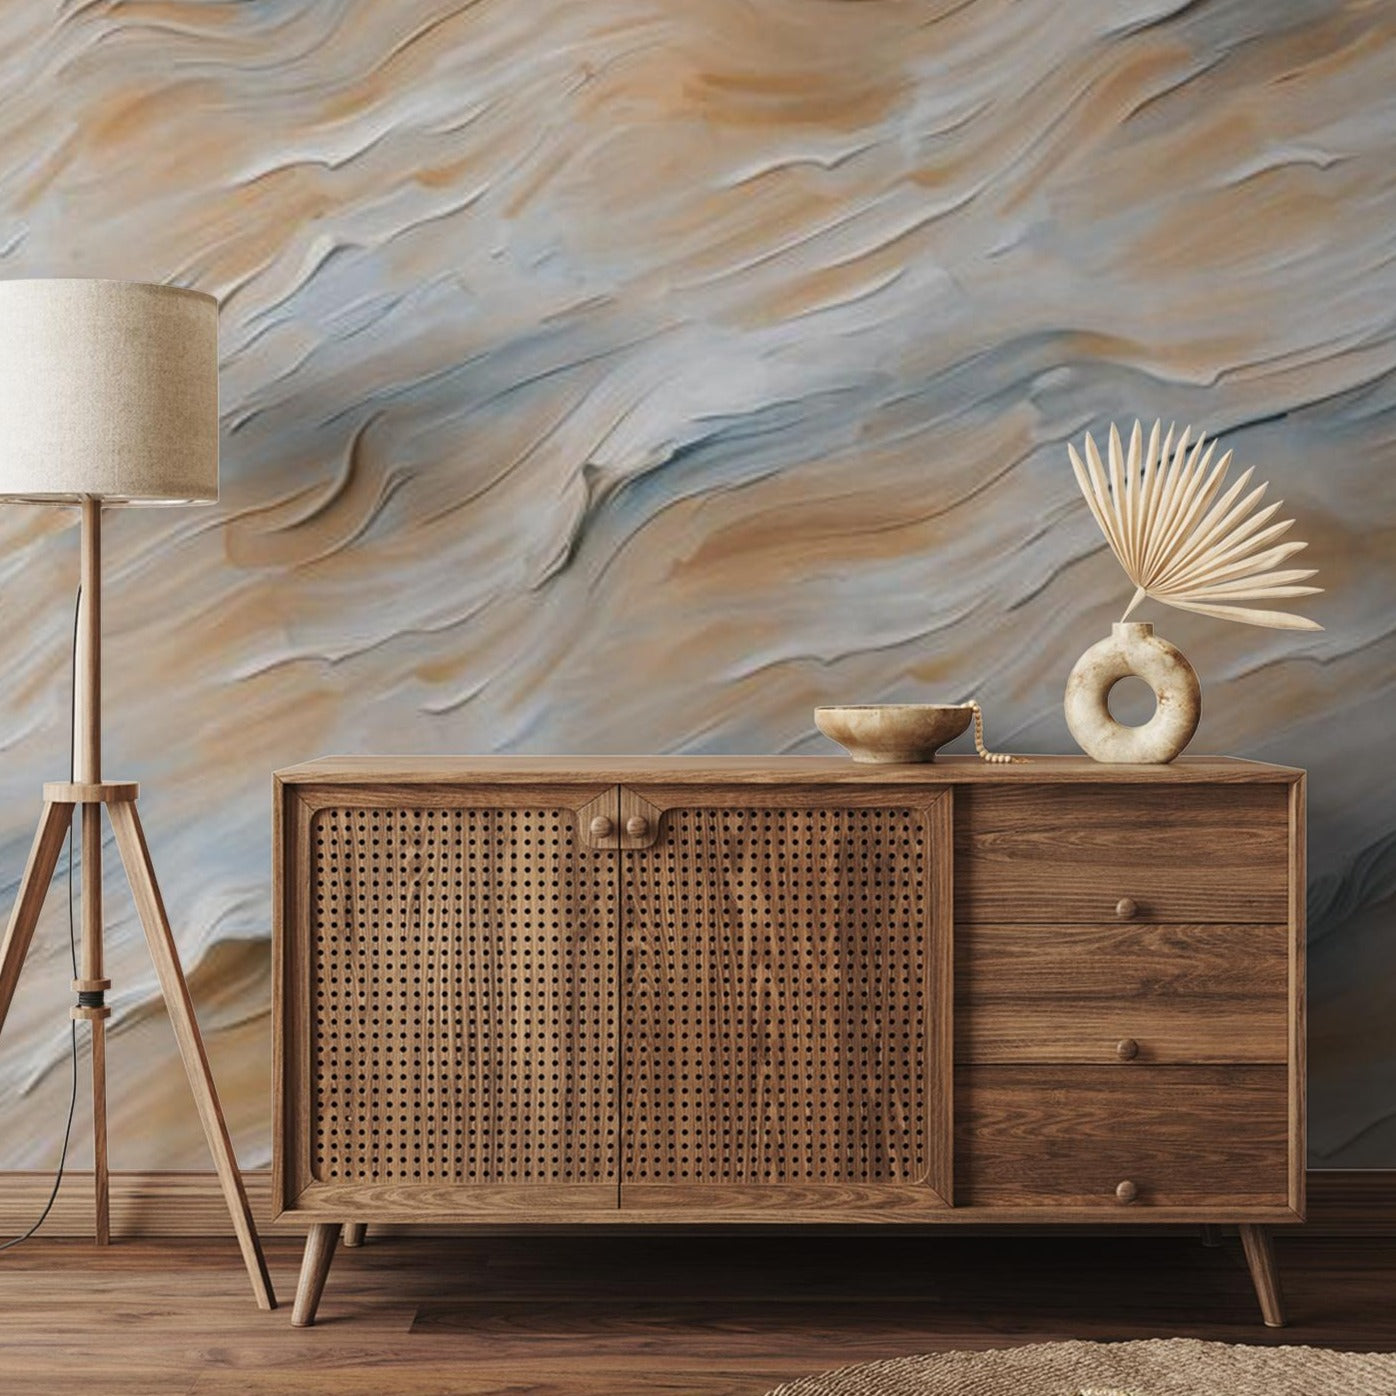 "Wall Blush's Coastal Drift Wallpaper in a stylish living room with modern wooden furniture."